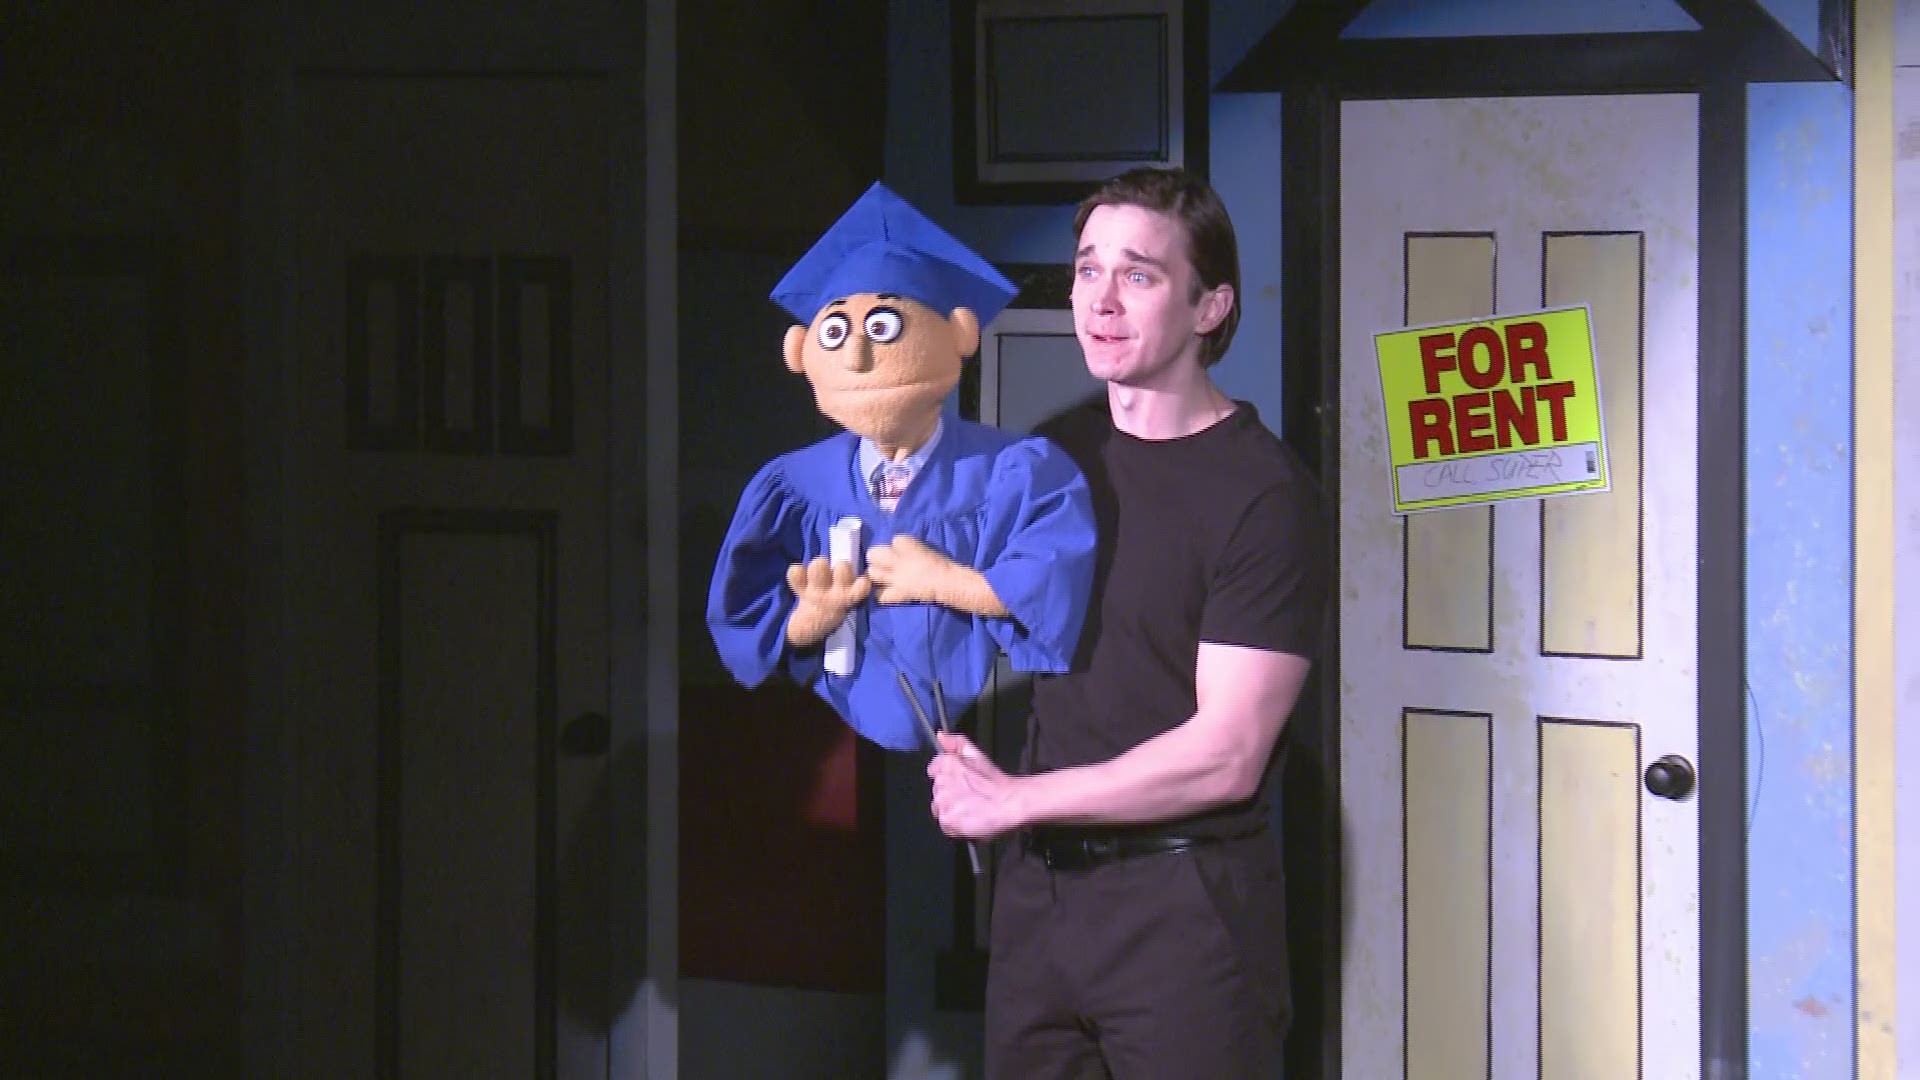 Avenue Q is on stage through March 3rd.